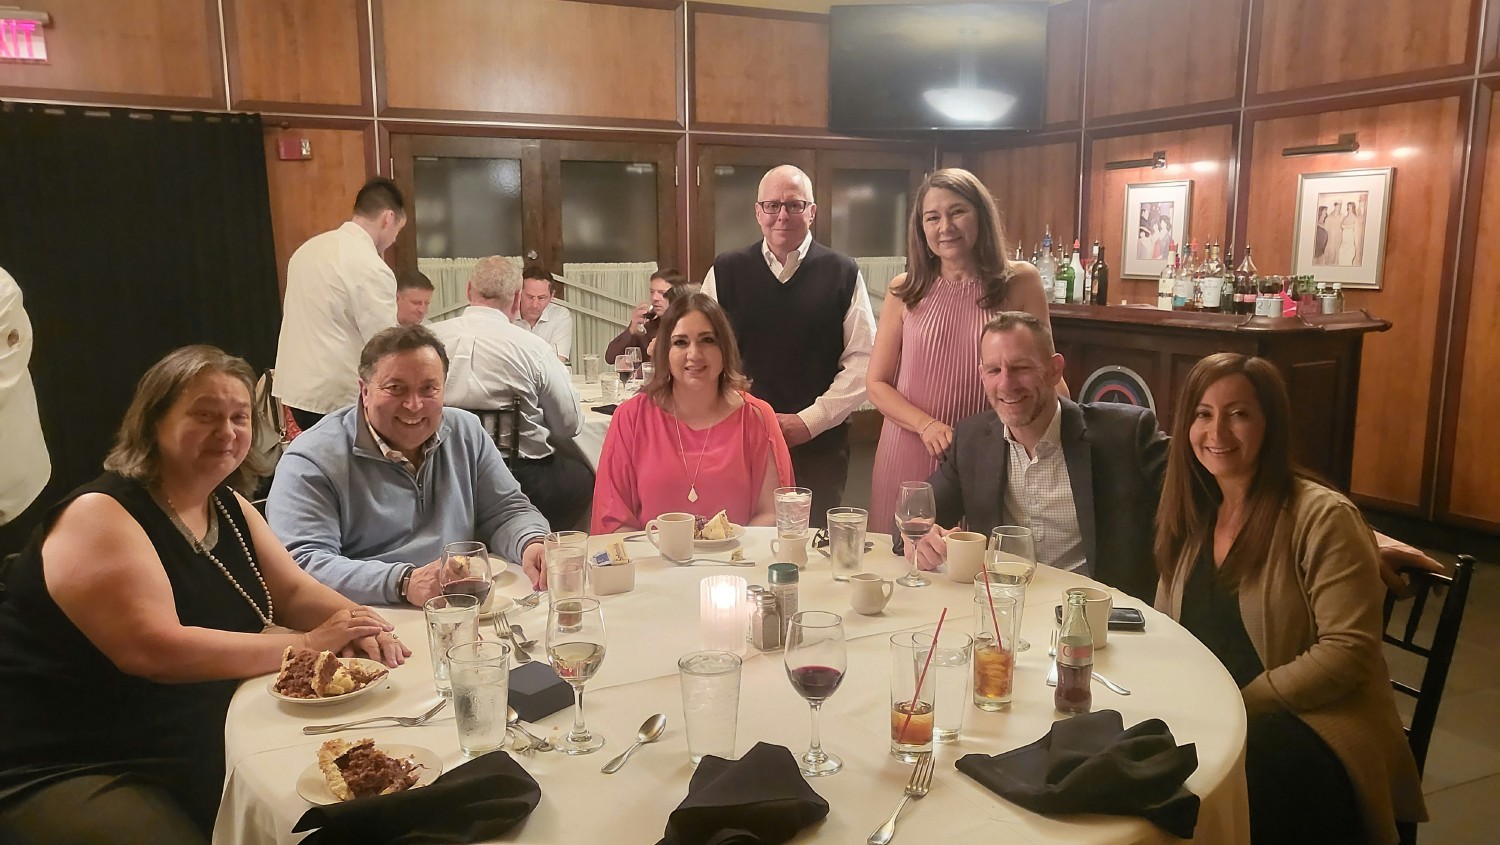 CEO Ron Friedman, President Vince Pinneri, and other Executive team leaders join a retirement celebration.